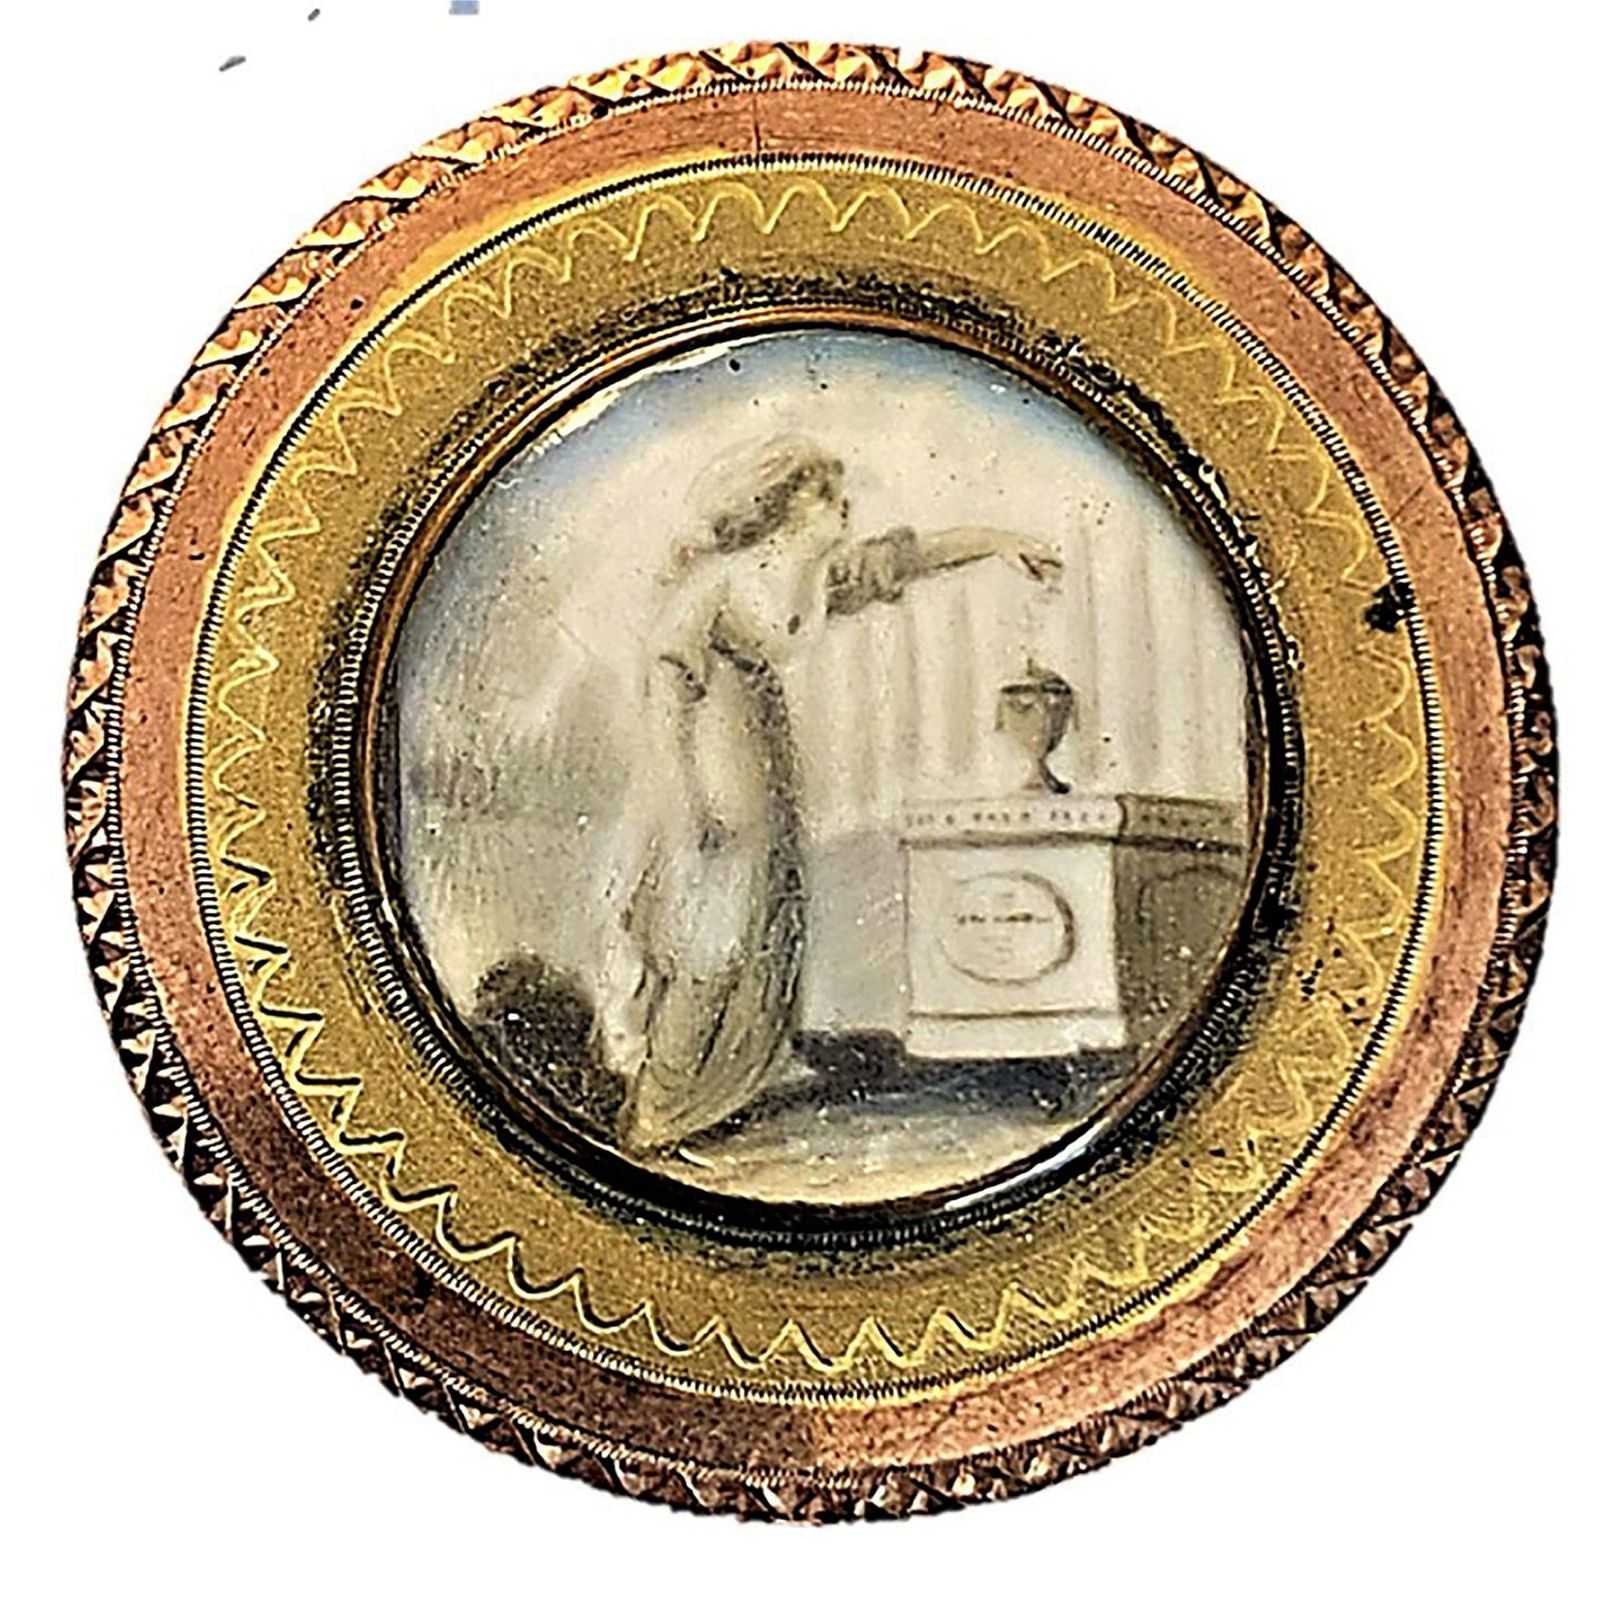 Late 18th-century copper and watercolor-on-ivory mourning button, estimated at $2,000-$4,000 at Lion and Unicorn.